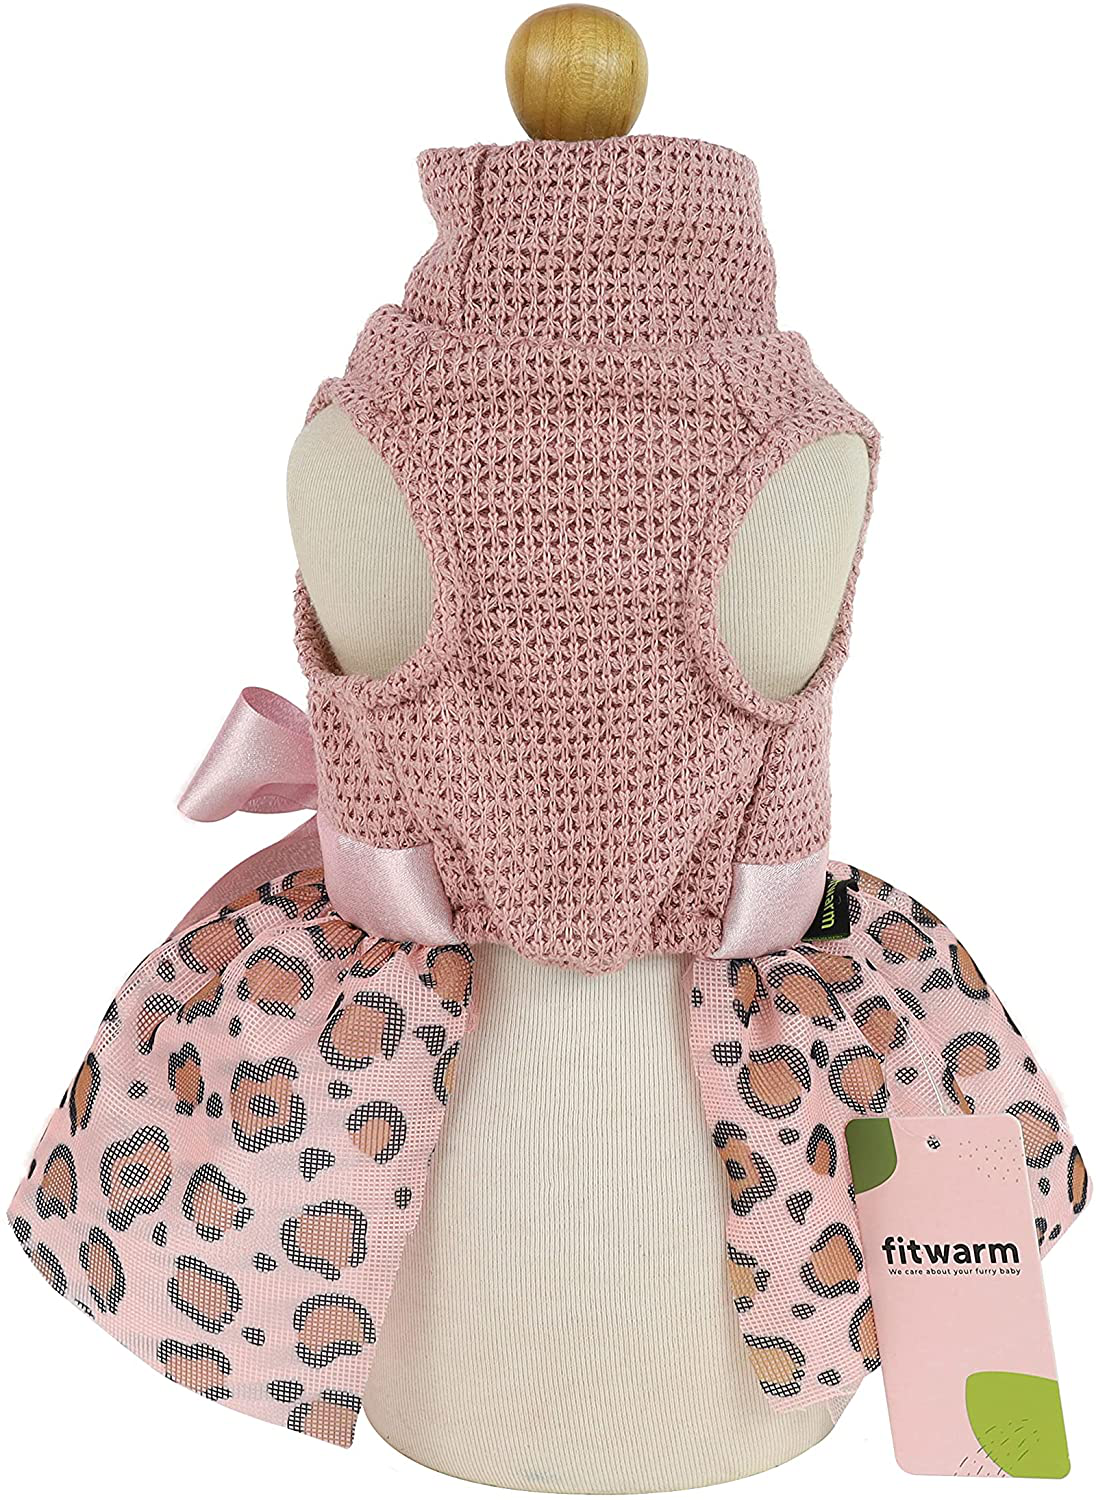 Fitwarm Leopard Dog Dress Lightweight Knitted Pet Clothes with Bowknot Doggie Turtleneck Tutu Puppy Girl One-Piece Doggy Outfits Cat Apparel Animals & Pet Supplies > Pet Supplies > Dog Supplies > Dog Apparel Fitwarm   